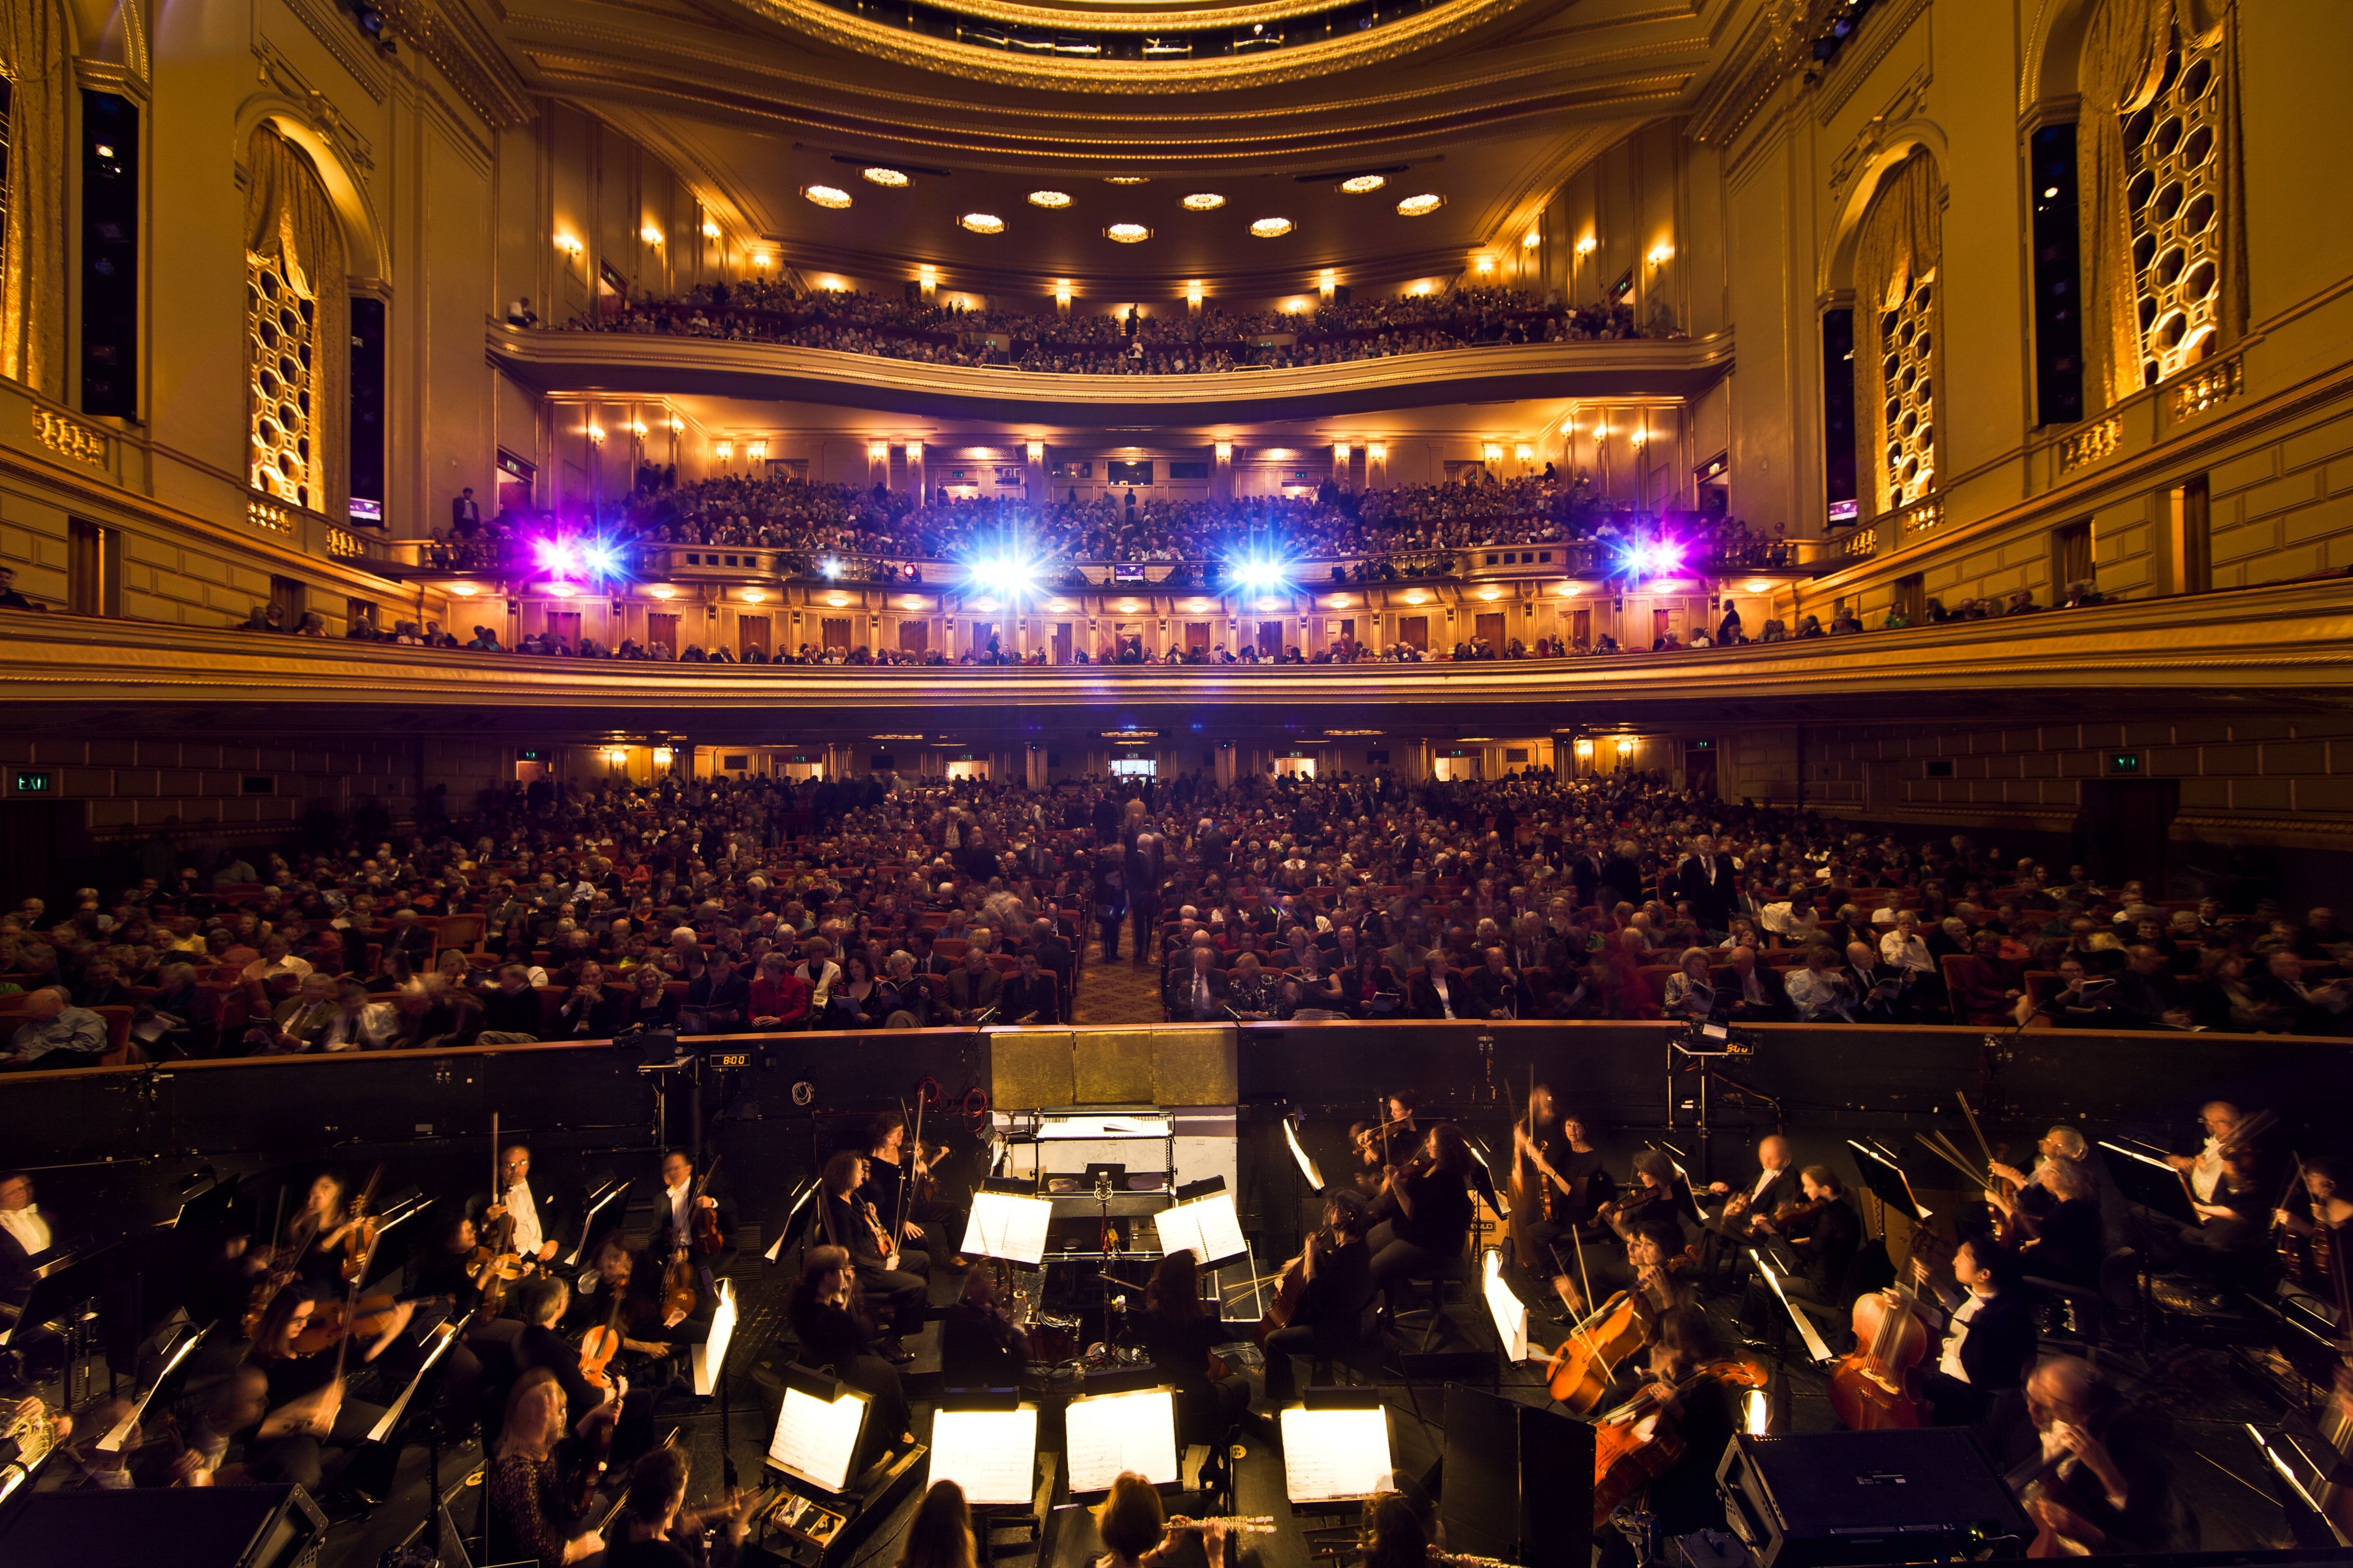 San Francisco Opera view from the stage showing orchestra and crowd